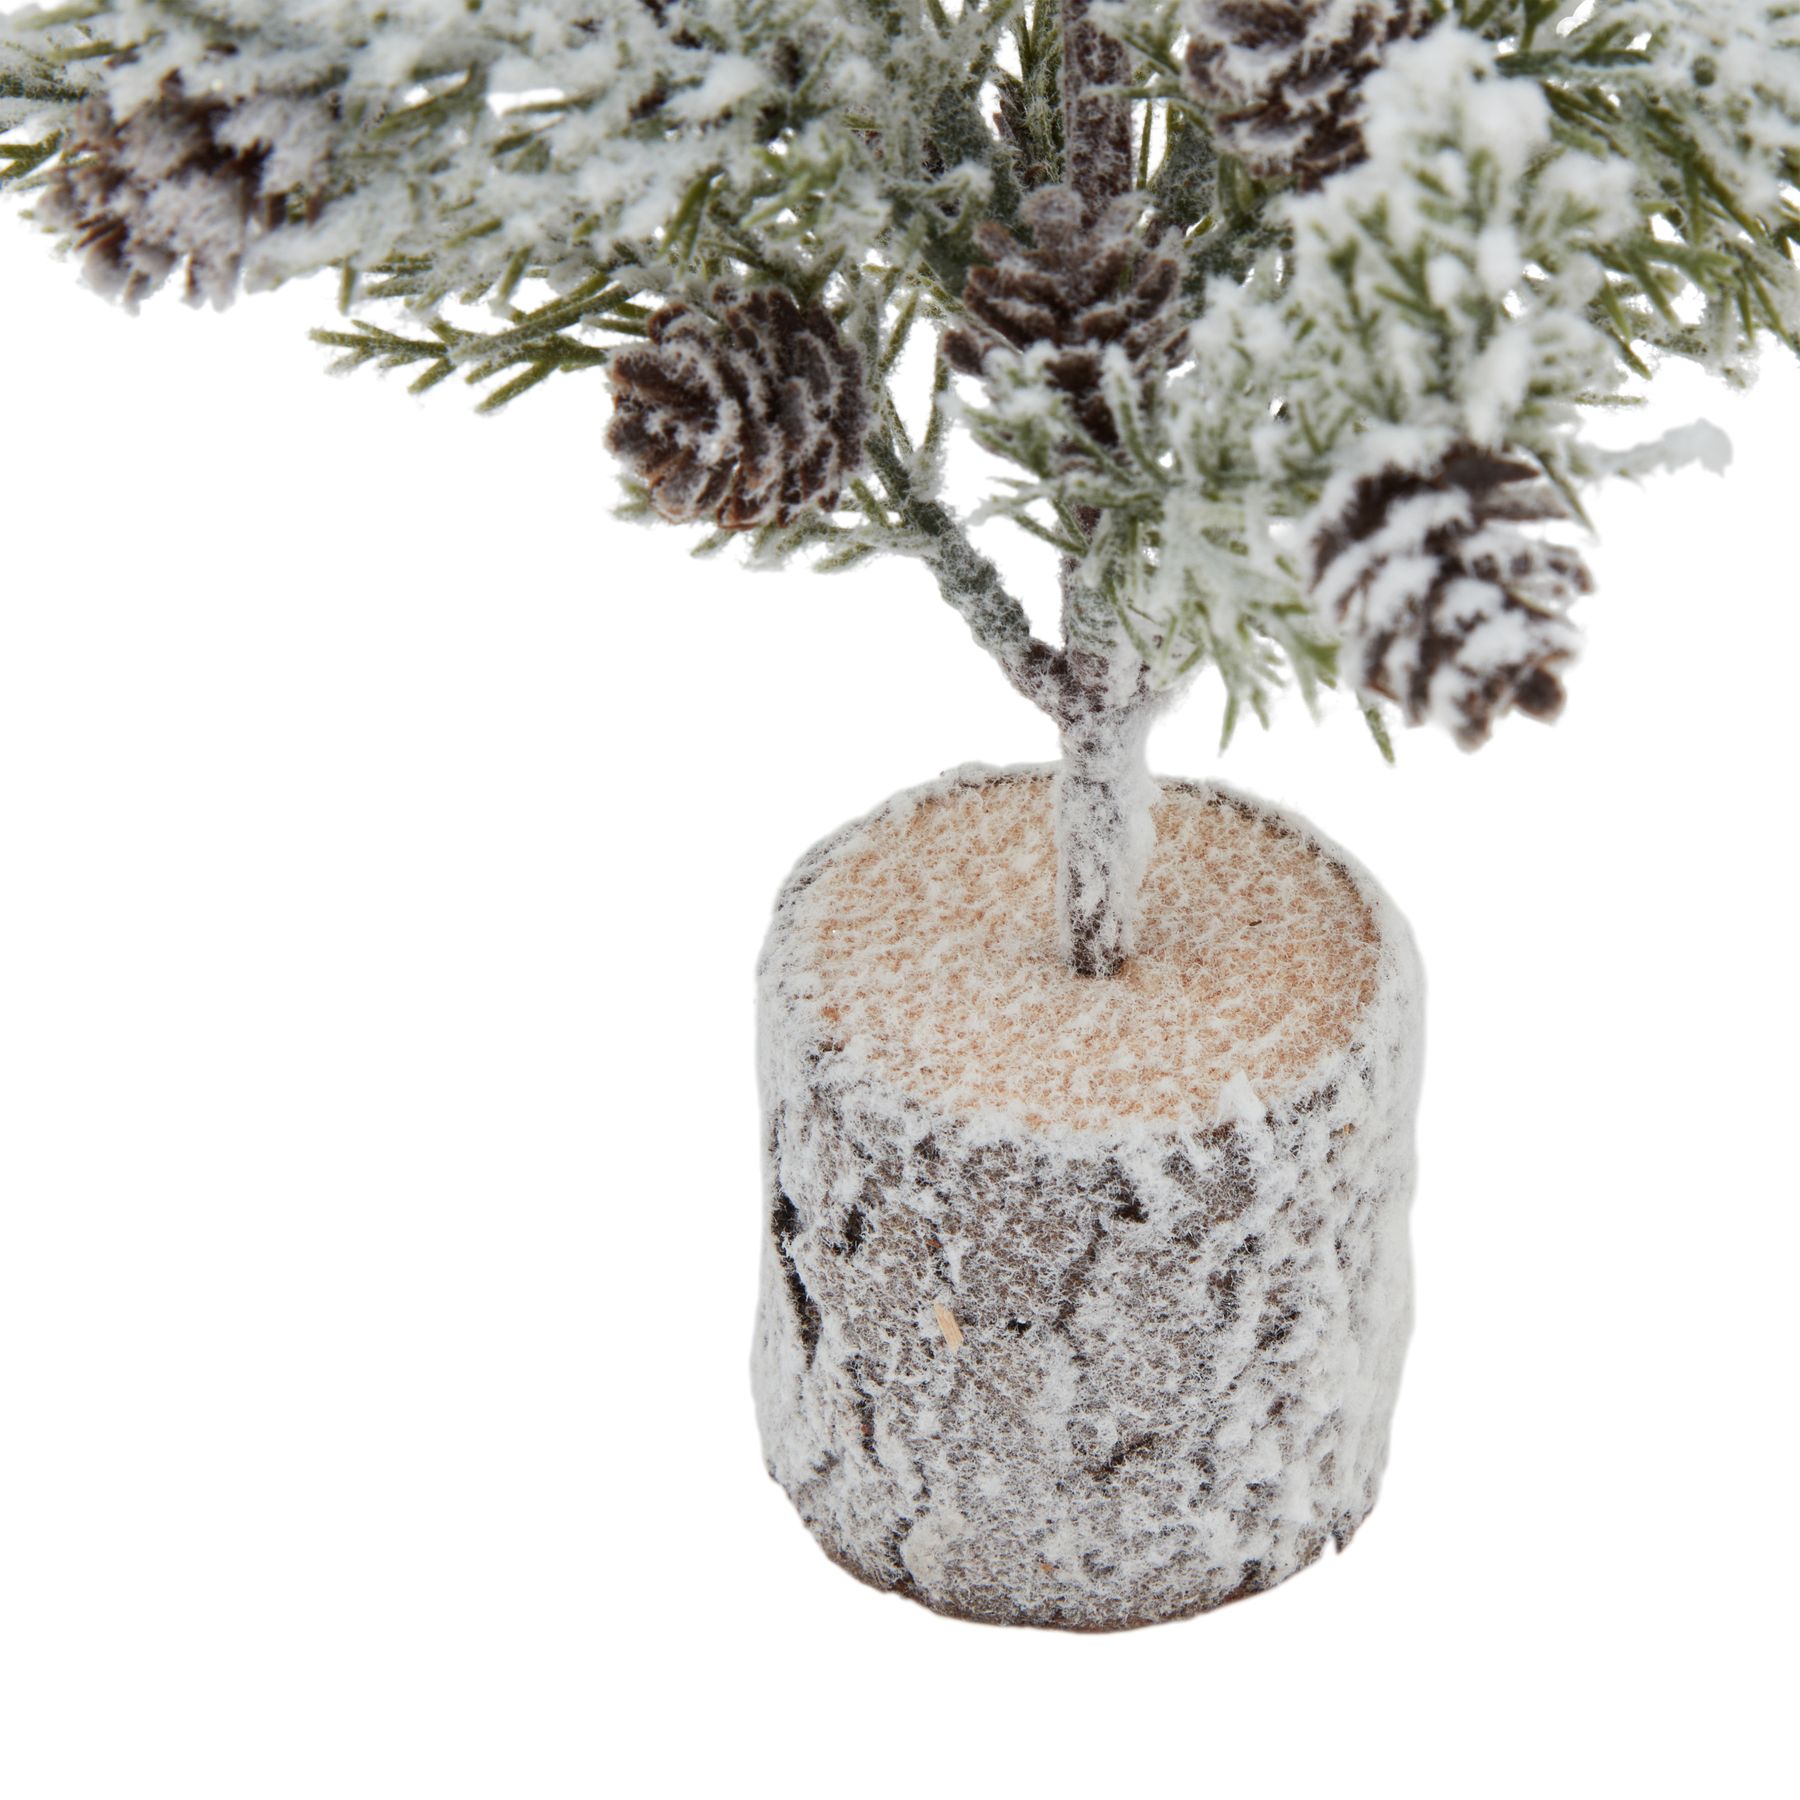 Small Snowy Fir Tree With Pincecones In Wood Log - Image 3